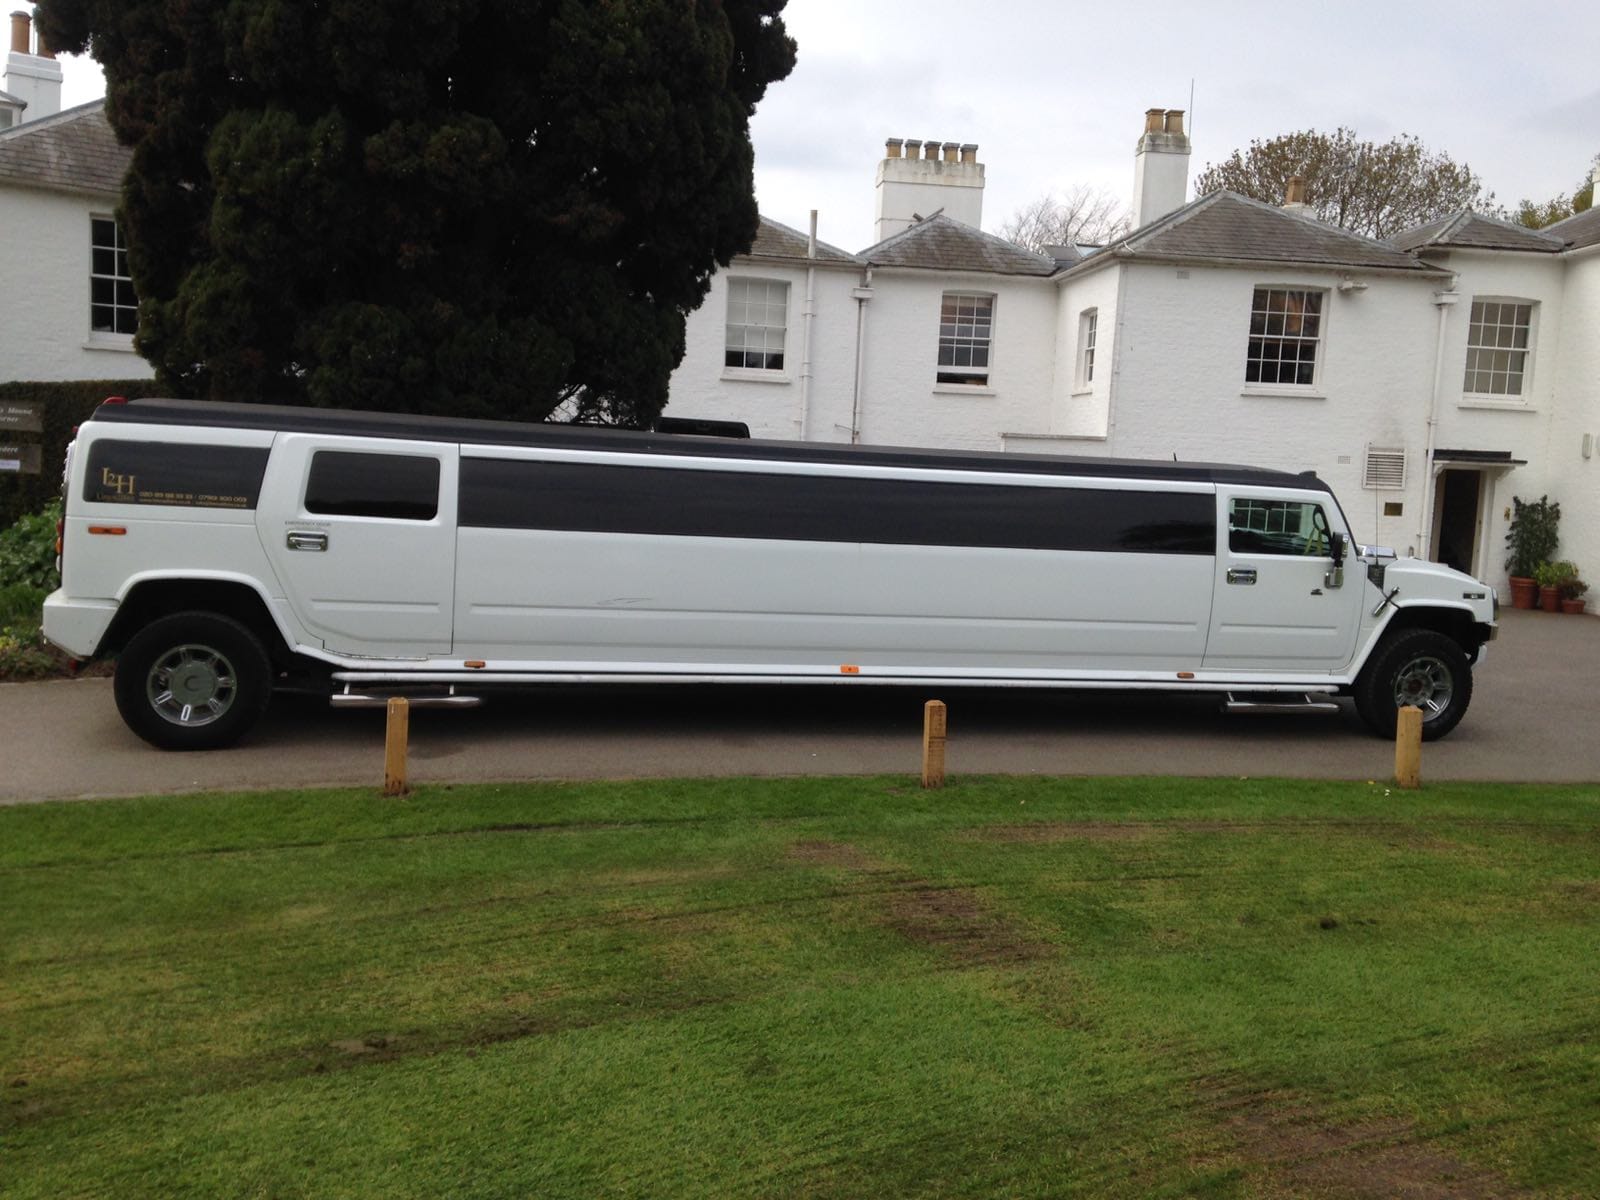 Hummer Hire (Prom Limo Hire)